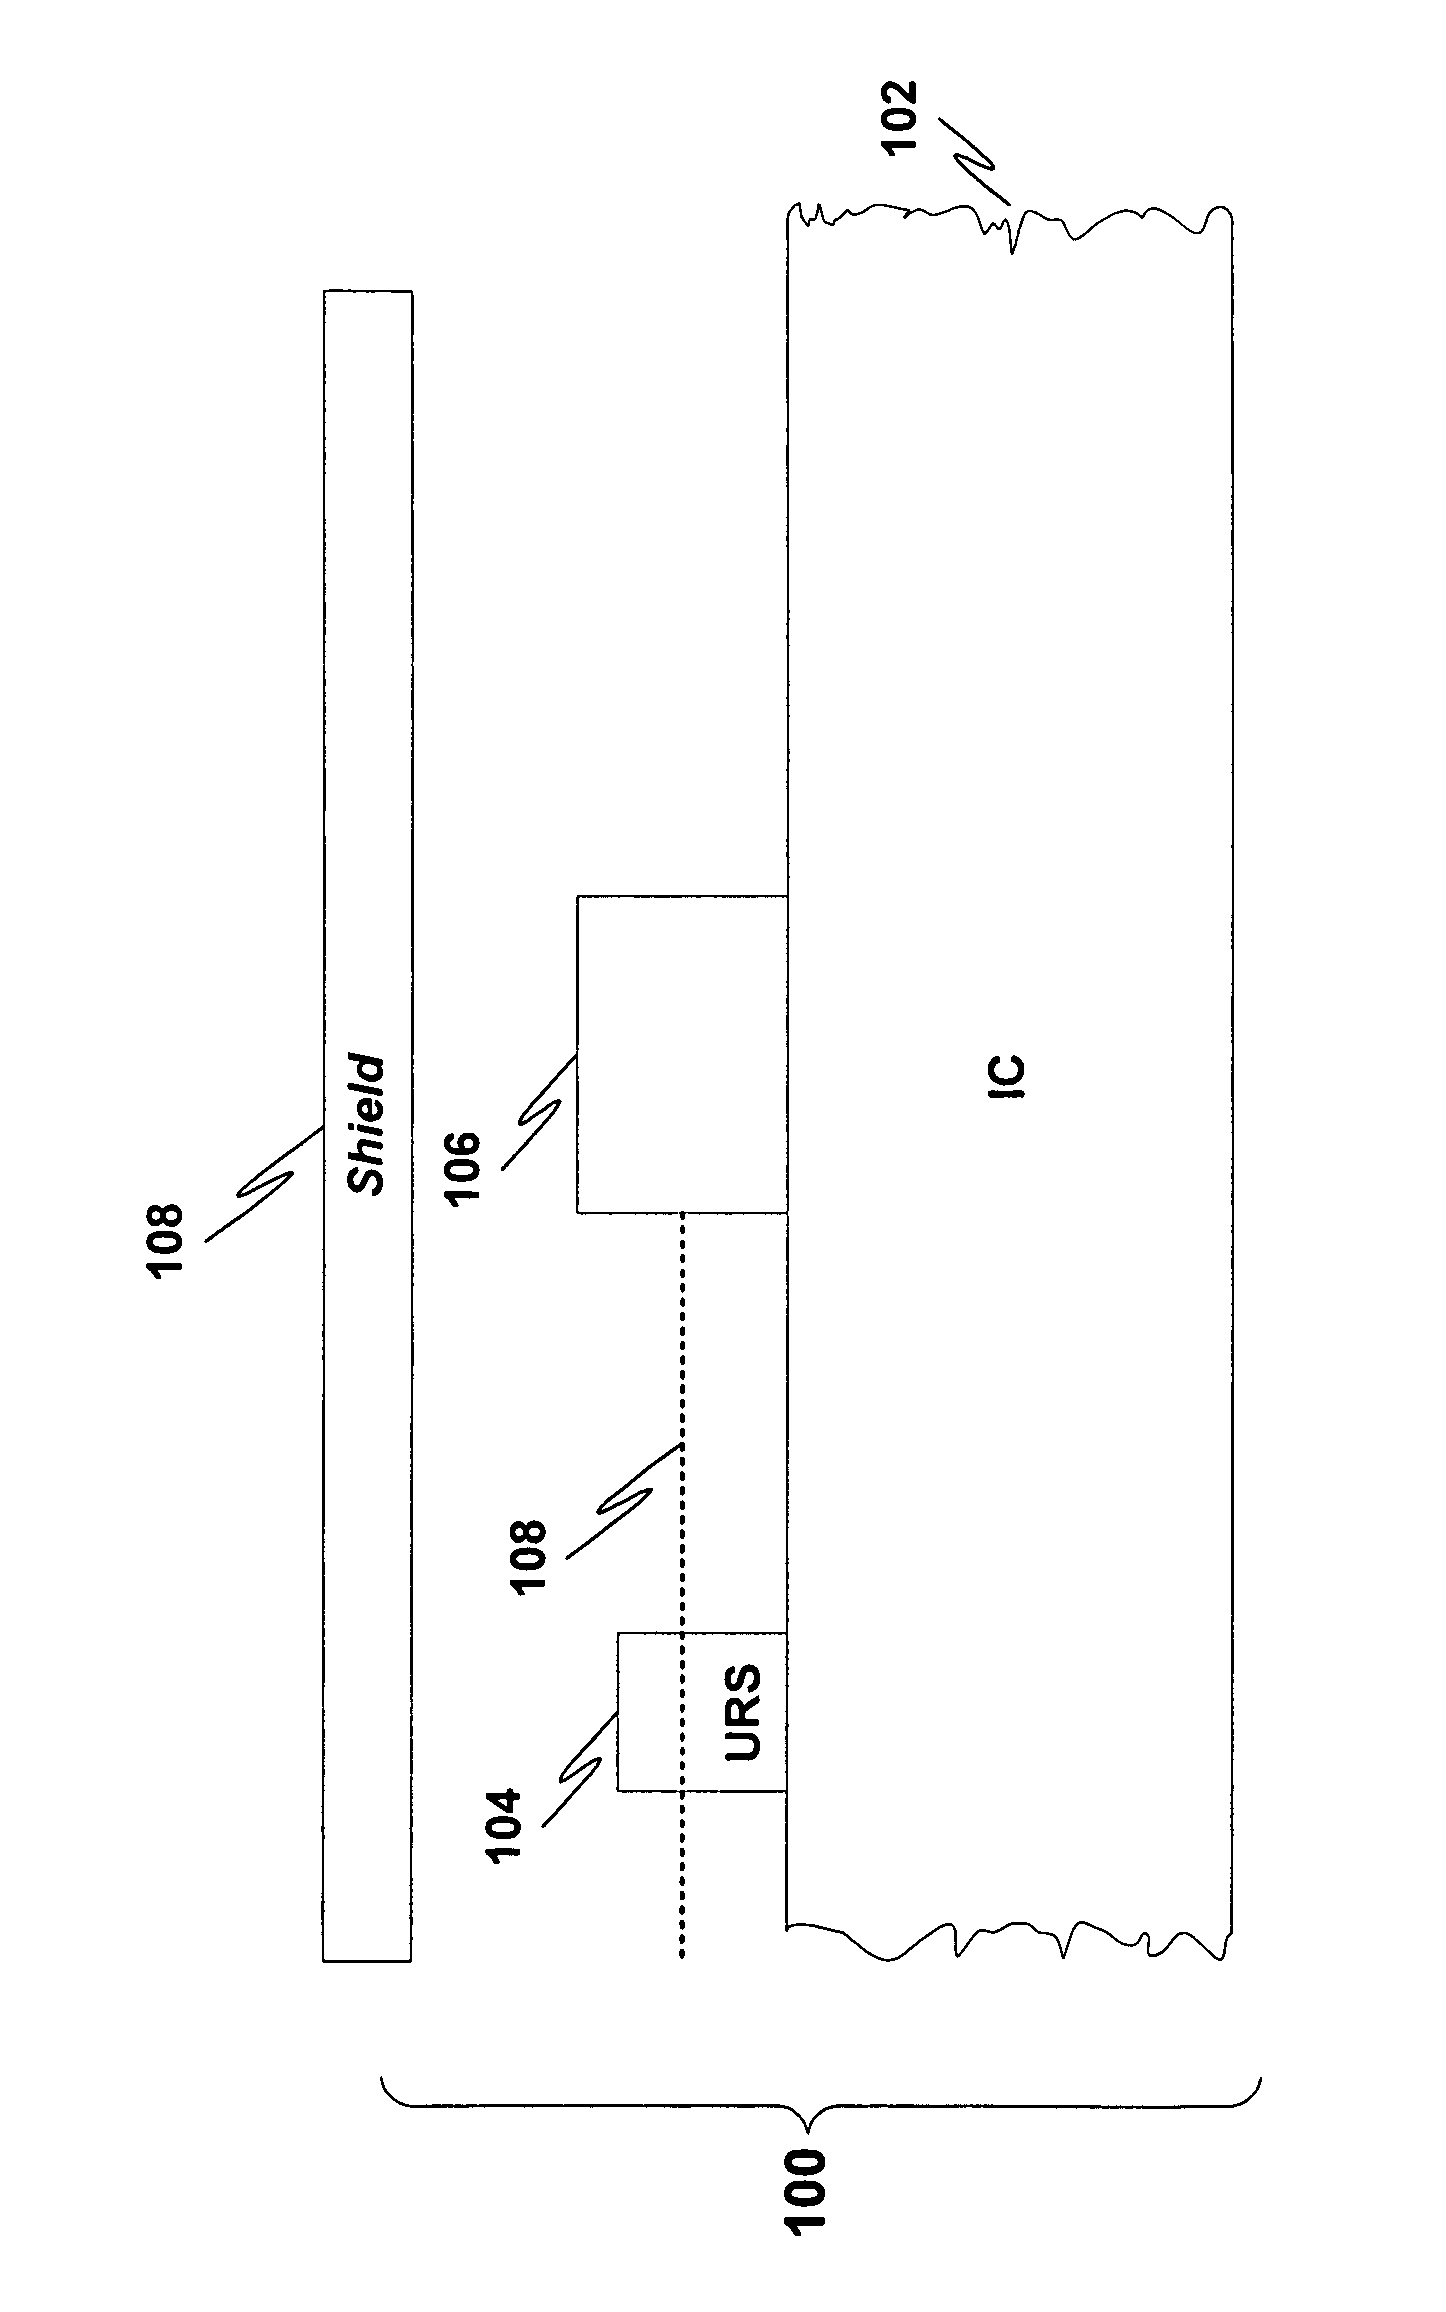 Shielding of integrated circuit package with high-permeability magnetic material